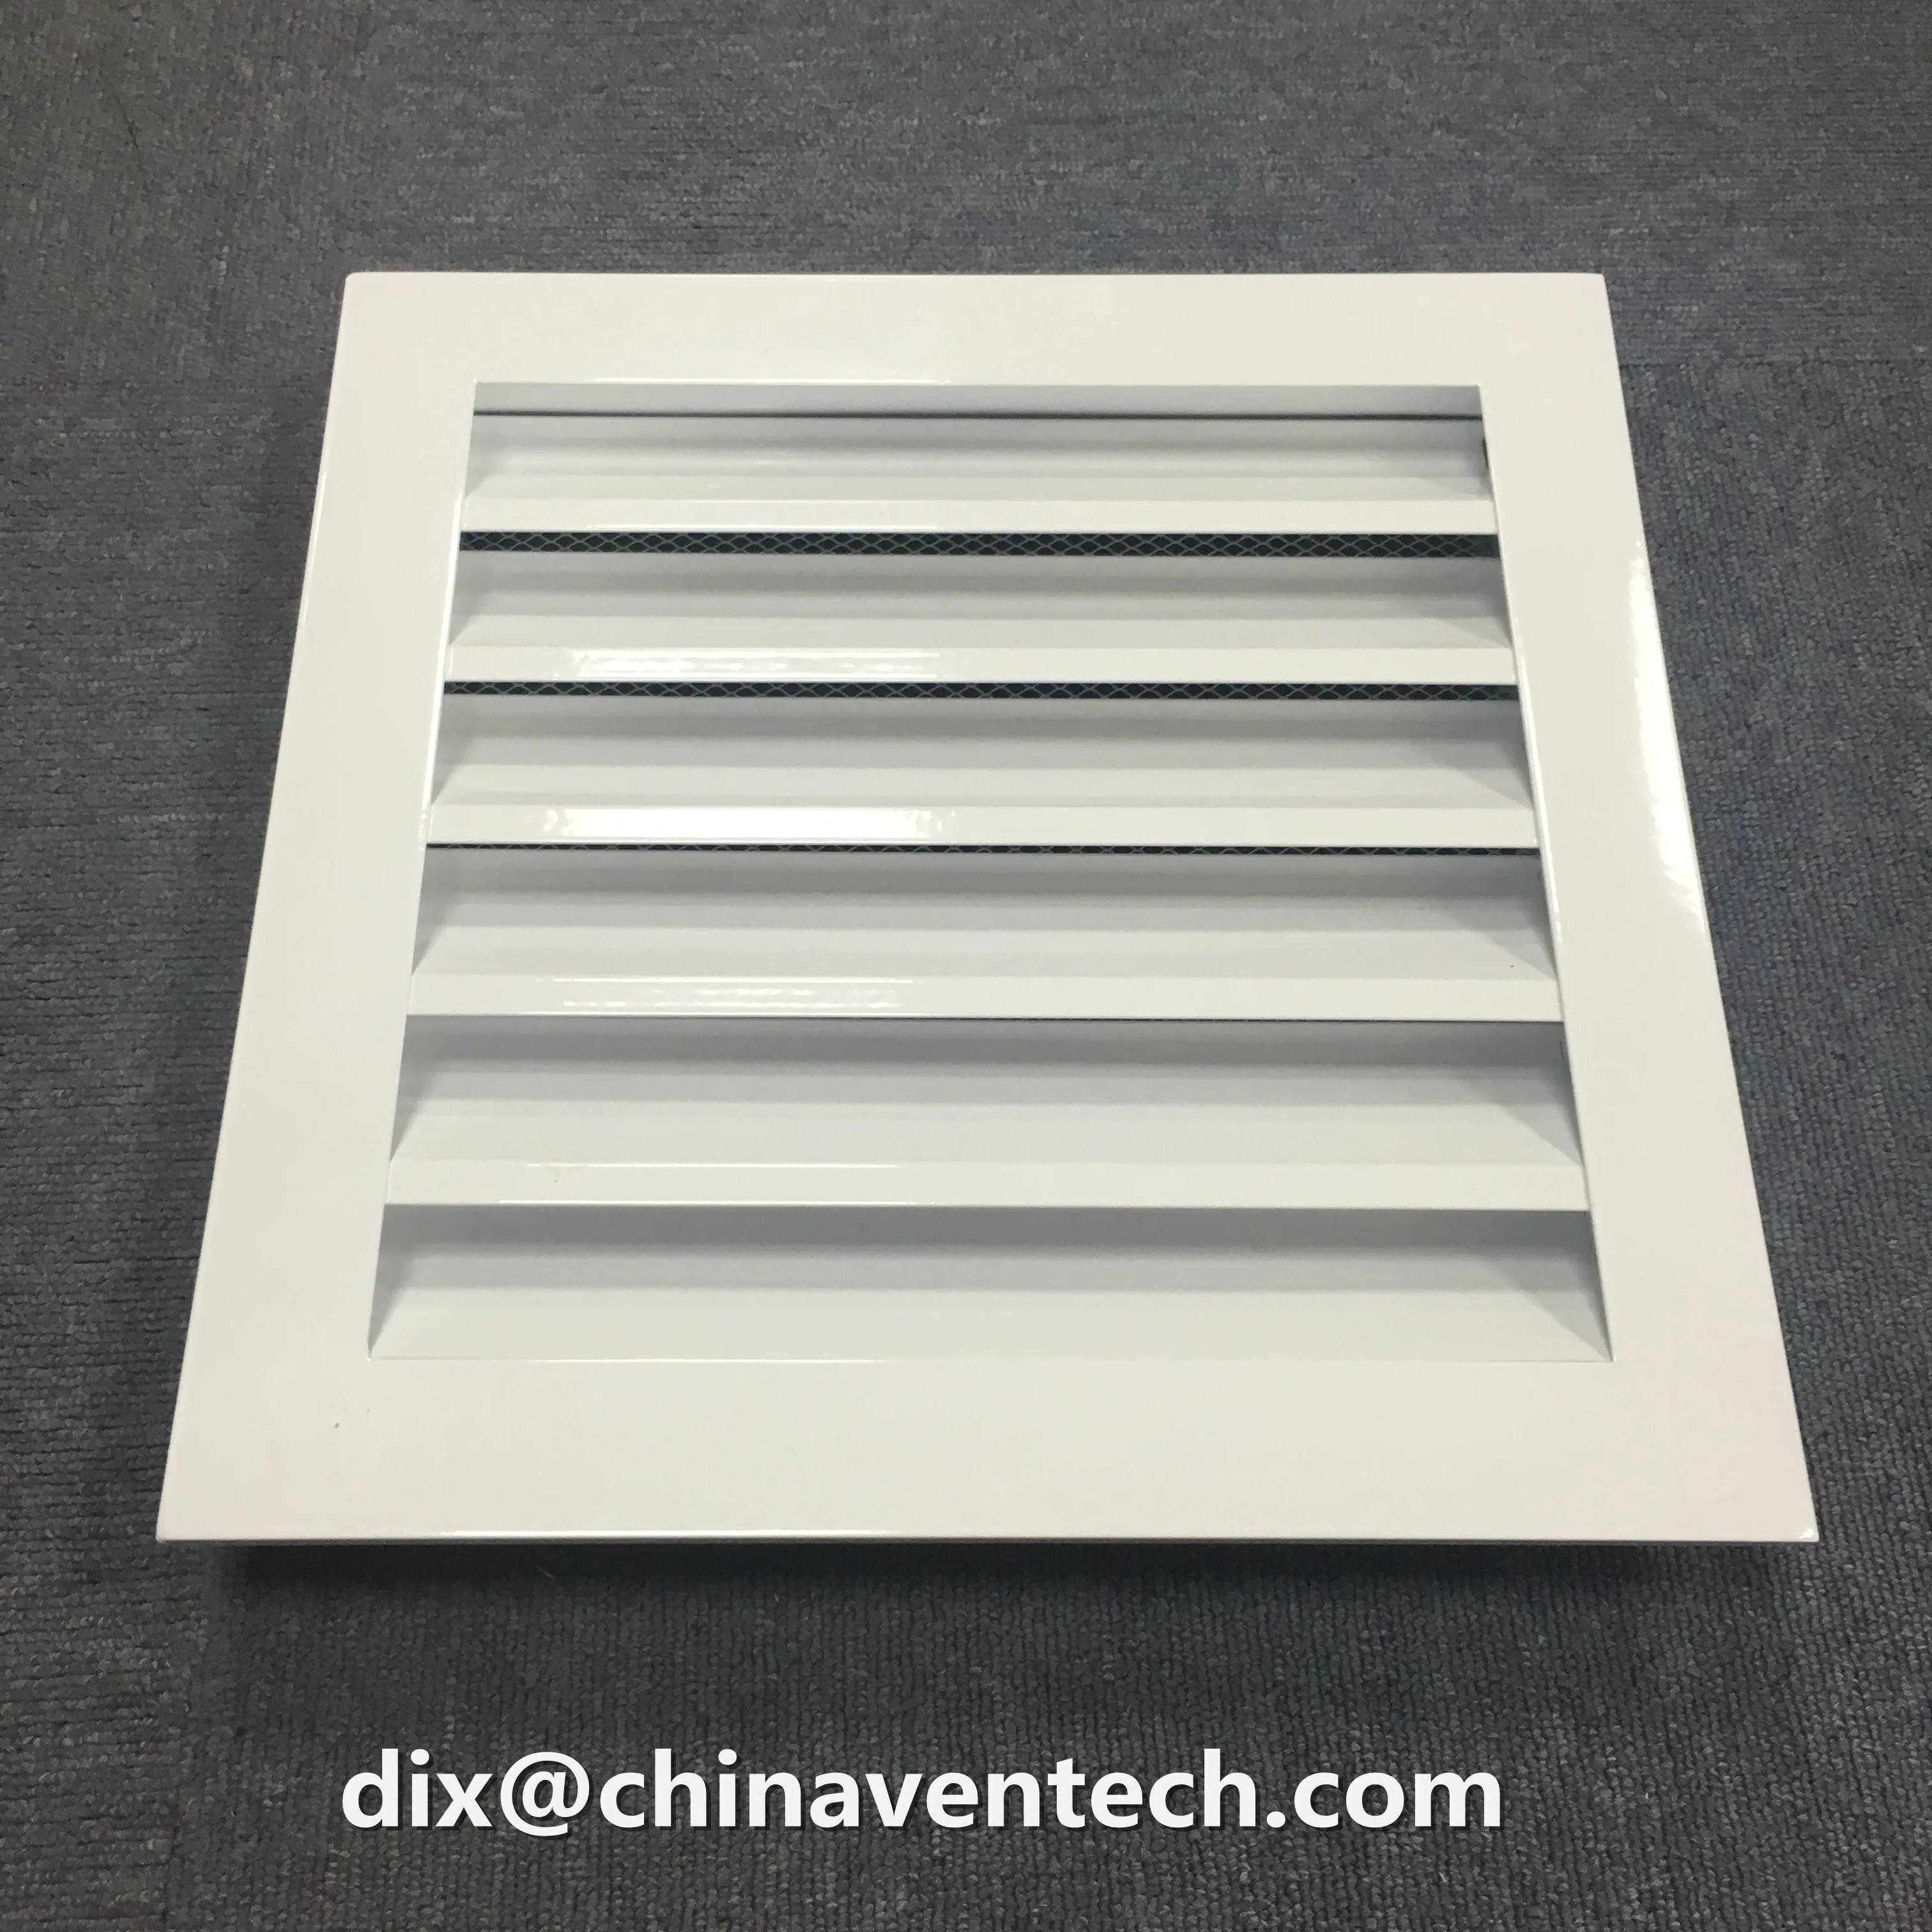 Hvac exterior grille ventilation weather louver with wire mesh